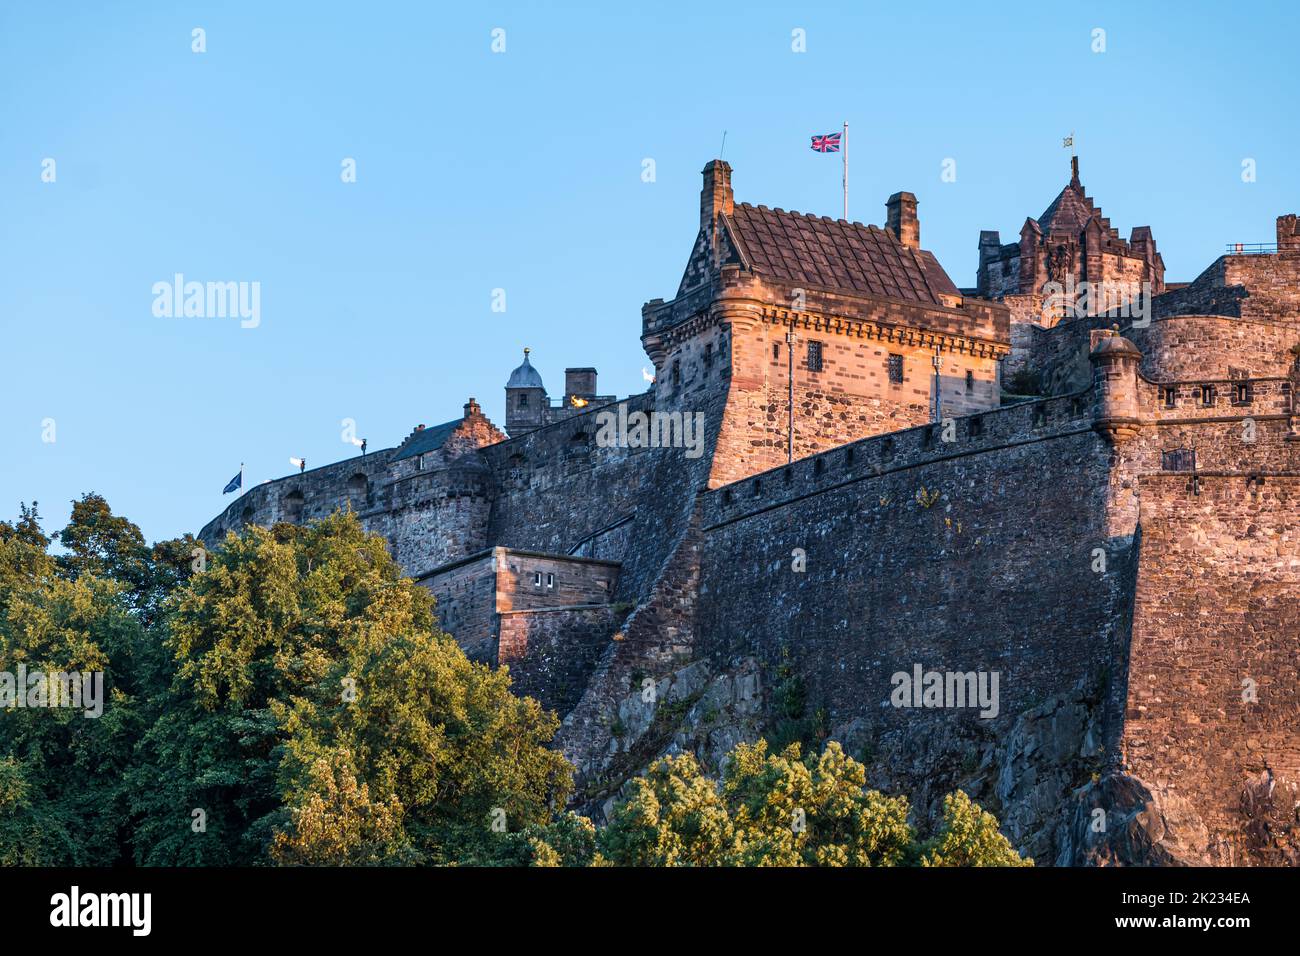 View of Edinburgh Castle flying a Union Jack British flag from the outcrop rock with clear blue sky, Scotland, UK Stock Photo